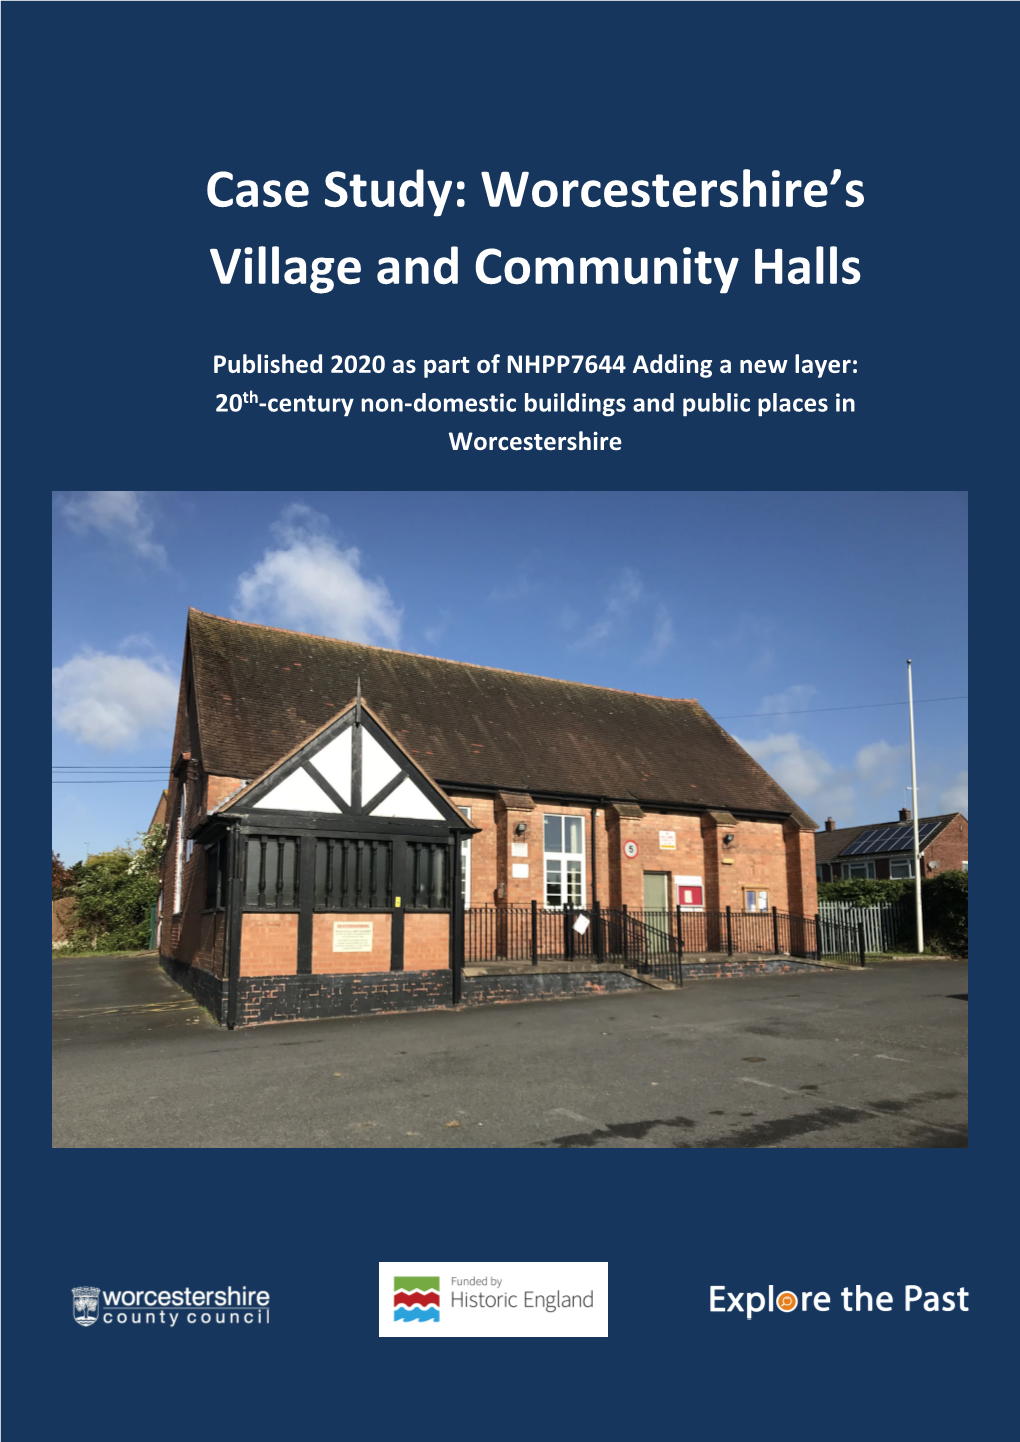 Worcestershire's Village and Community Halls CASE STUDY